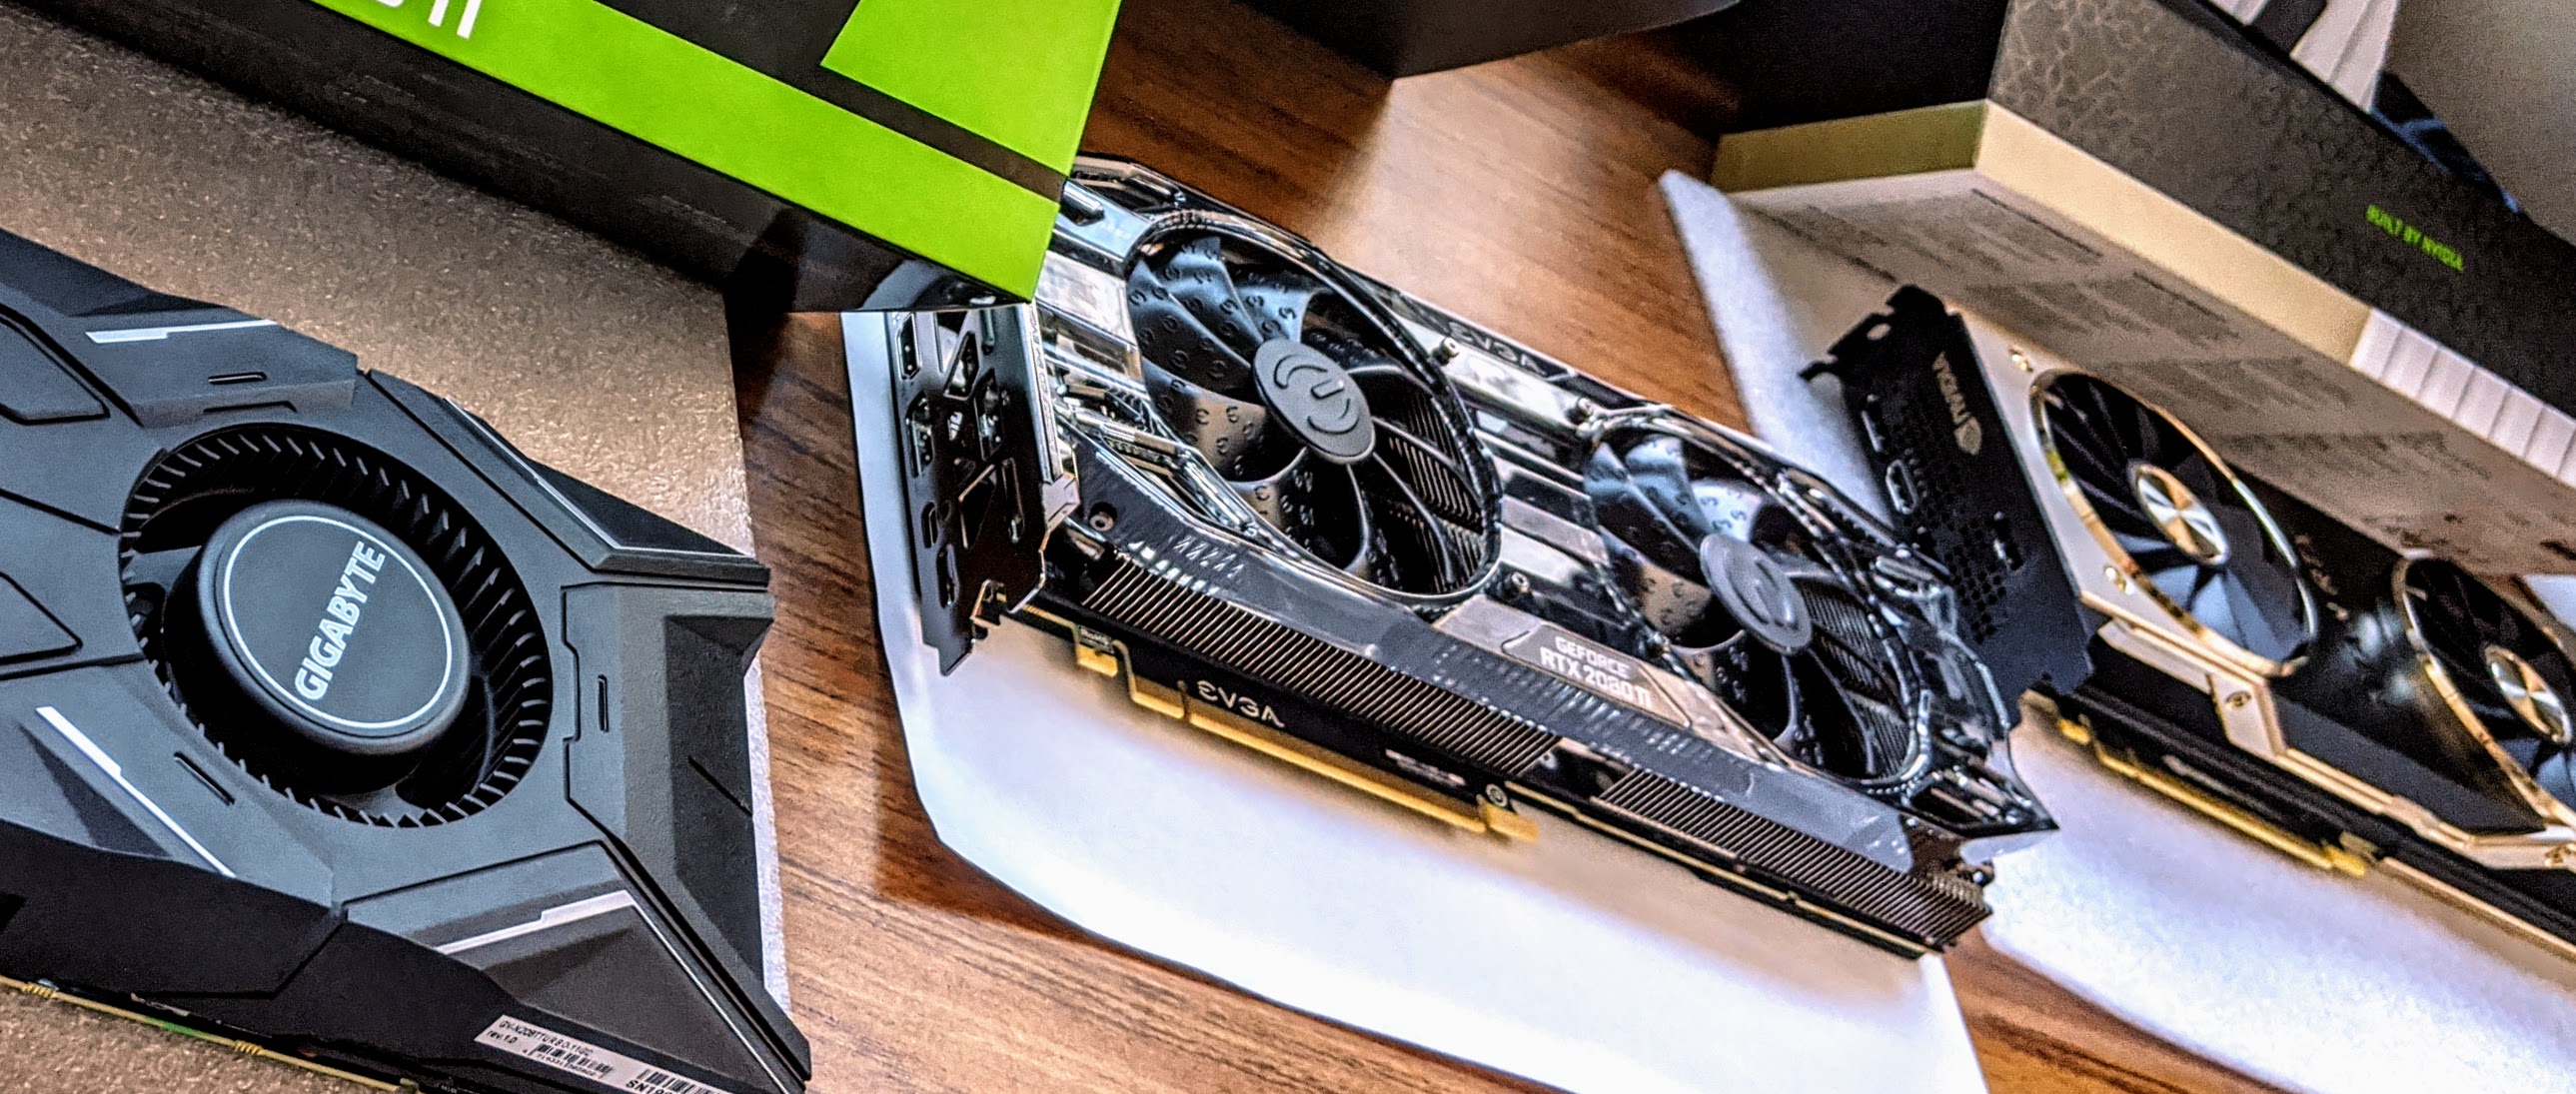 Benchmarking: Which GPU for Deep Learning?